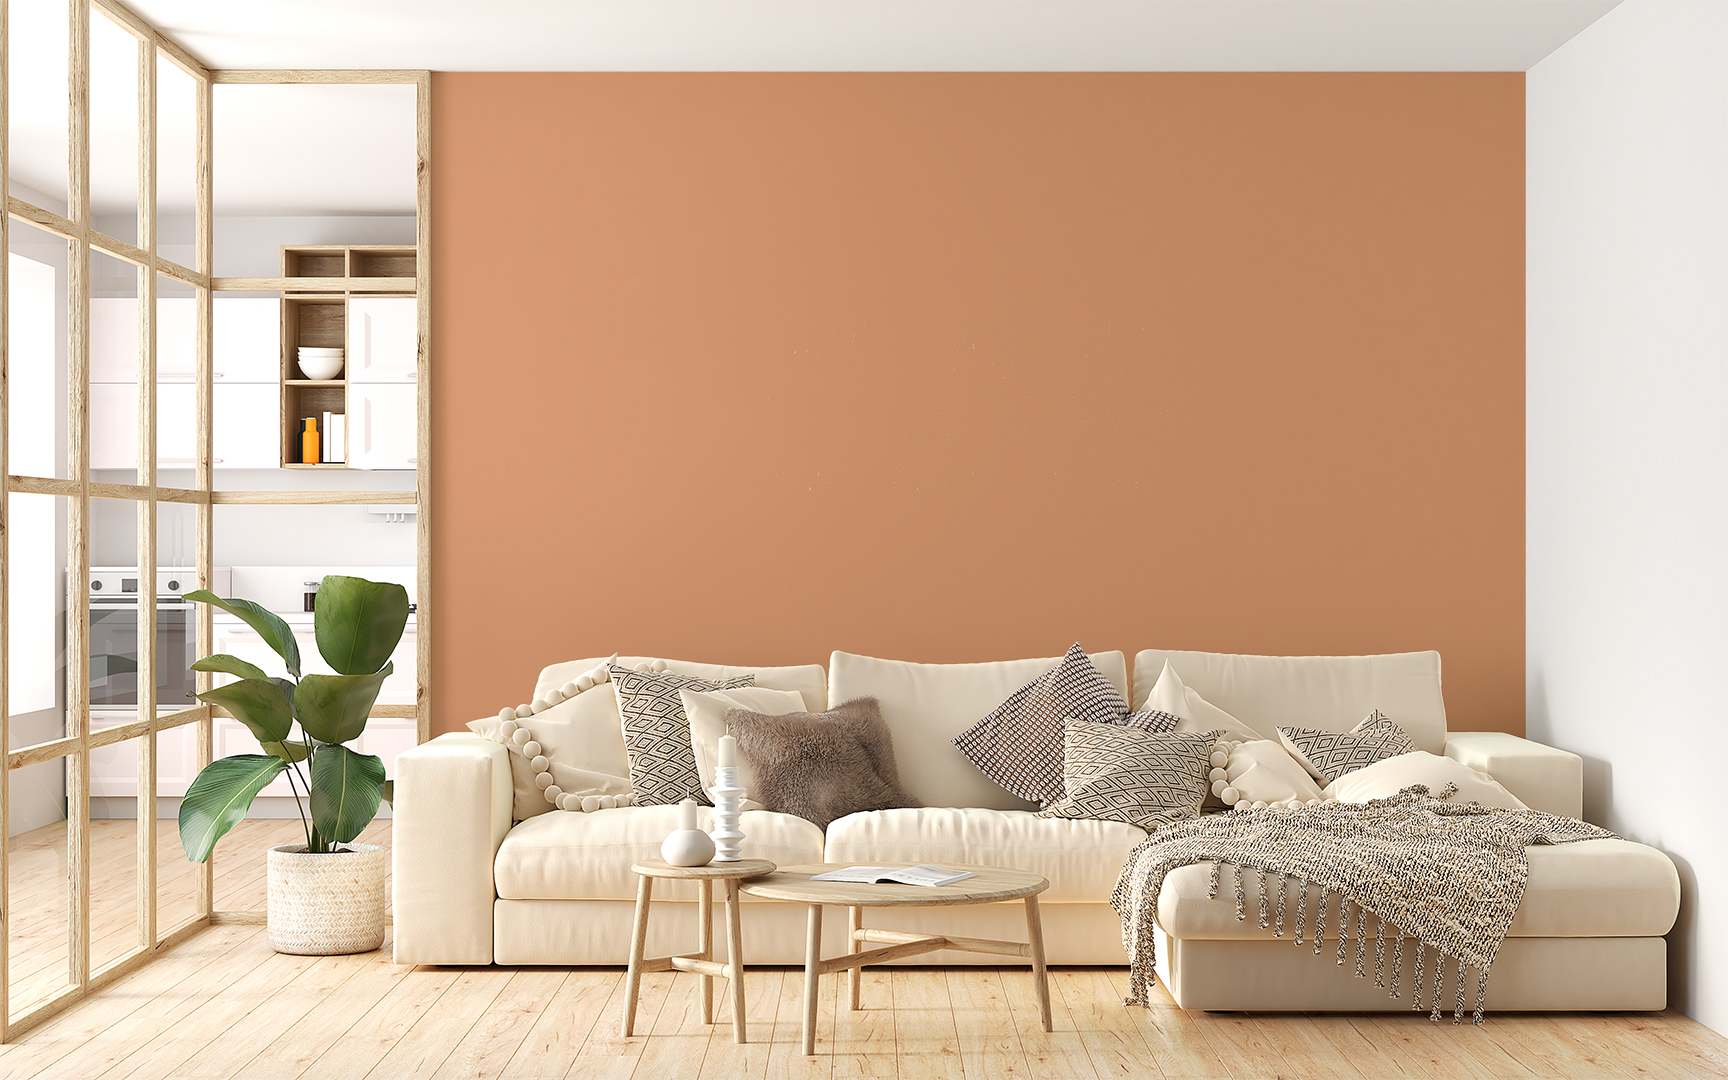 A Living Room Wall Painted with Accent Orange Shade